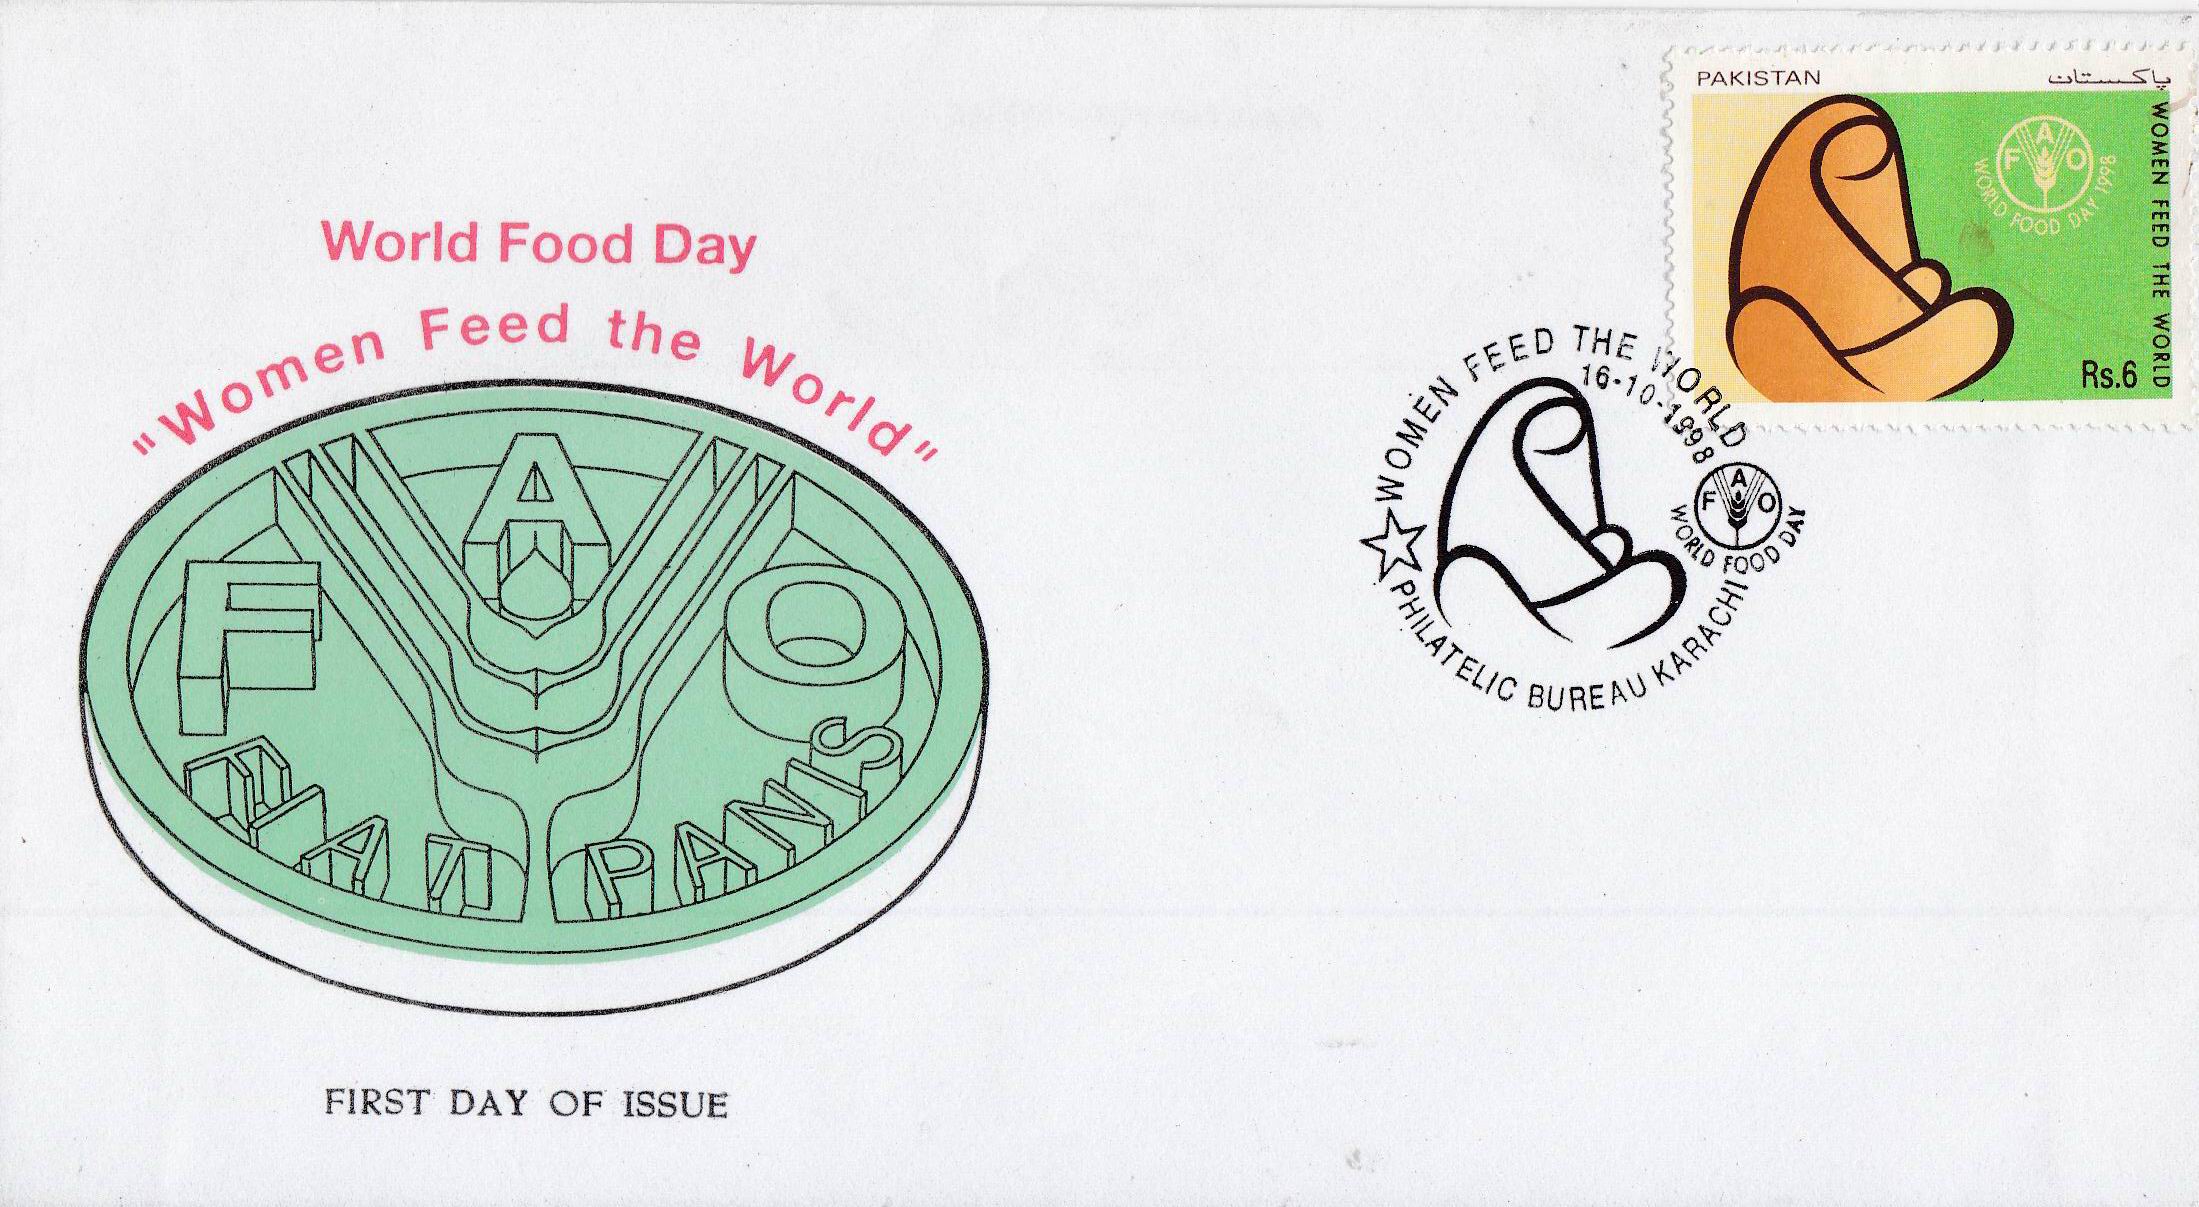 Pakistan Fdc 1998 Brochure & Stamp World Food Day Women Feed FAO - Click Image to Close